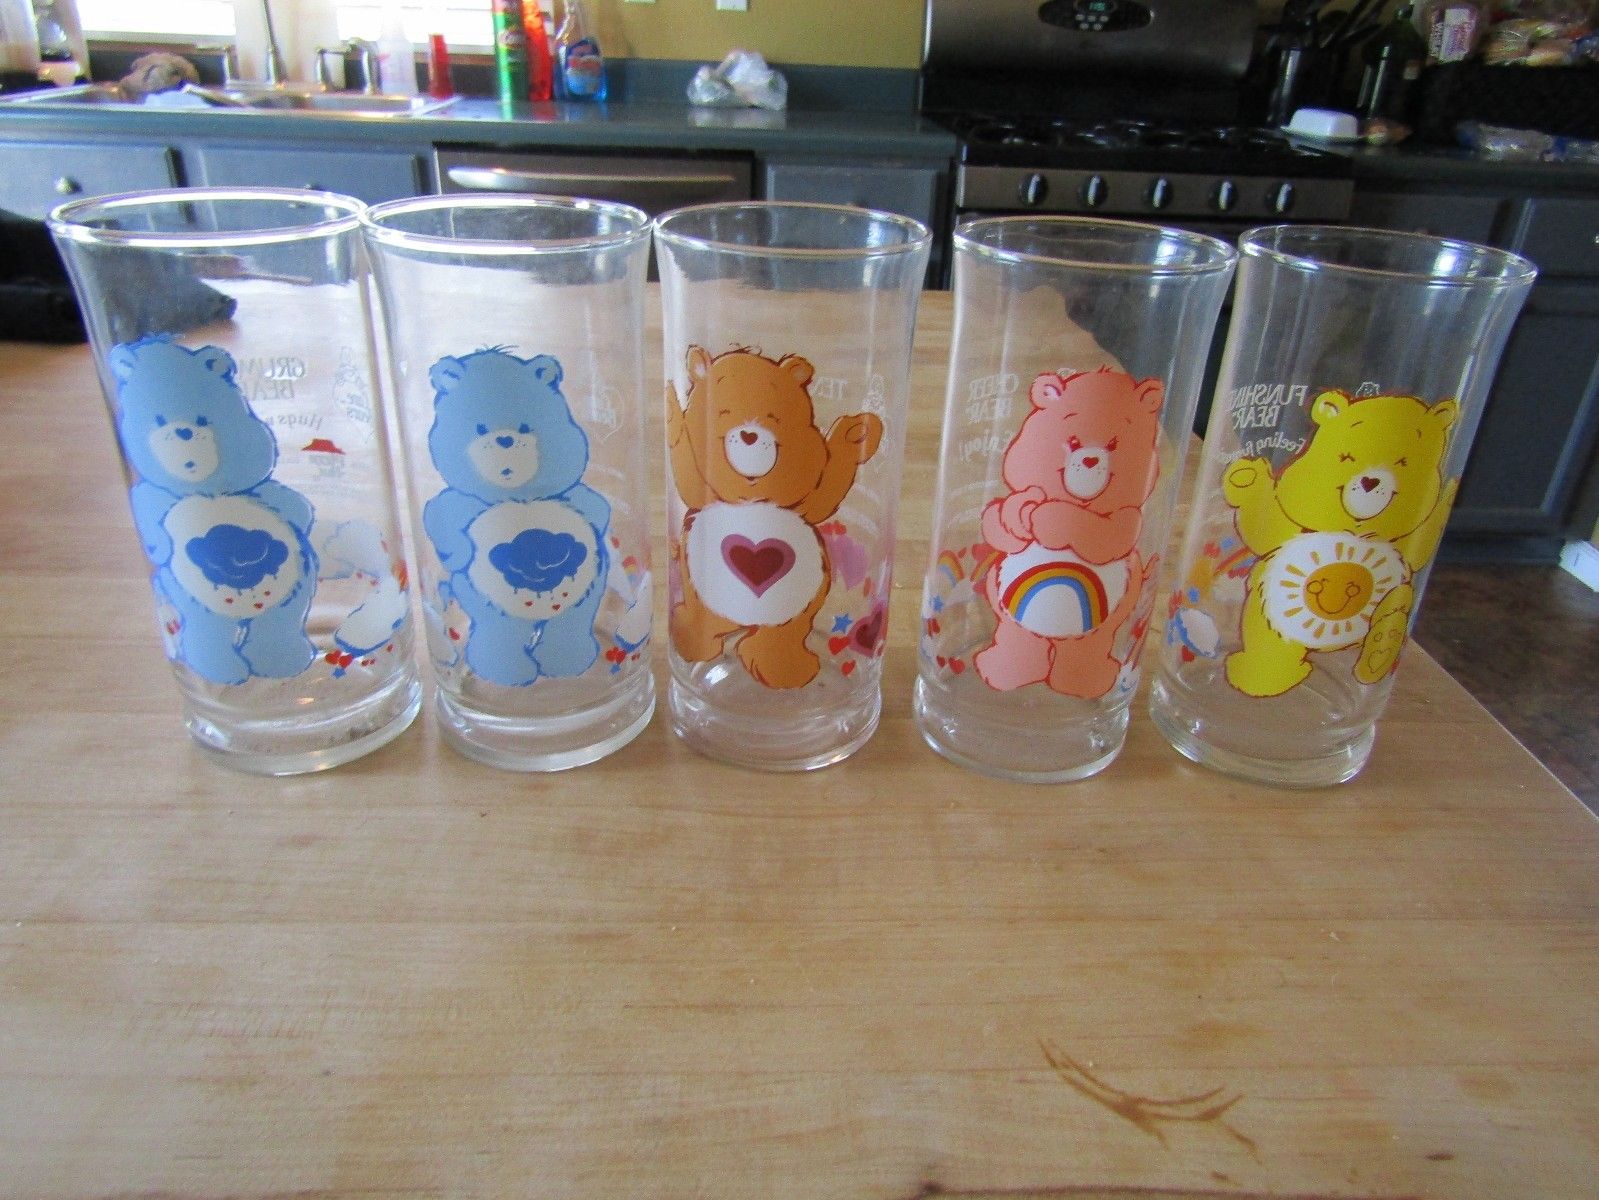 Set of 5 Vintage Care Bear Glasses from Pizza Hut Collector's Series